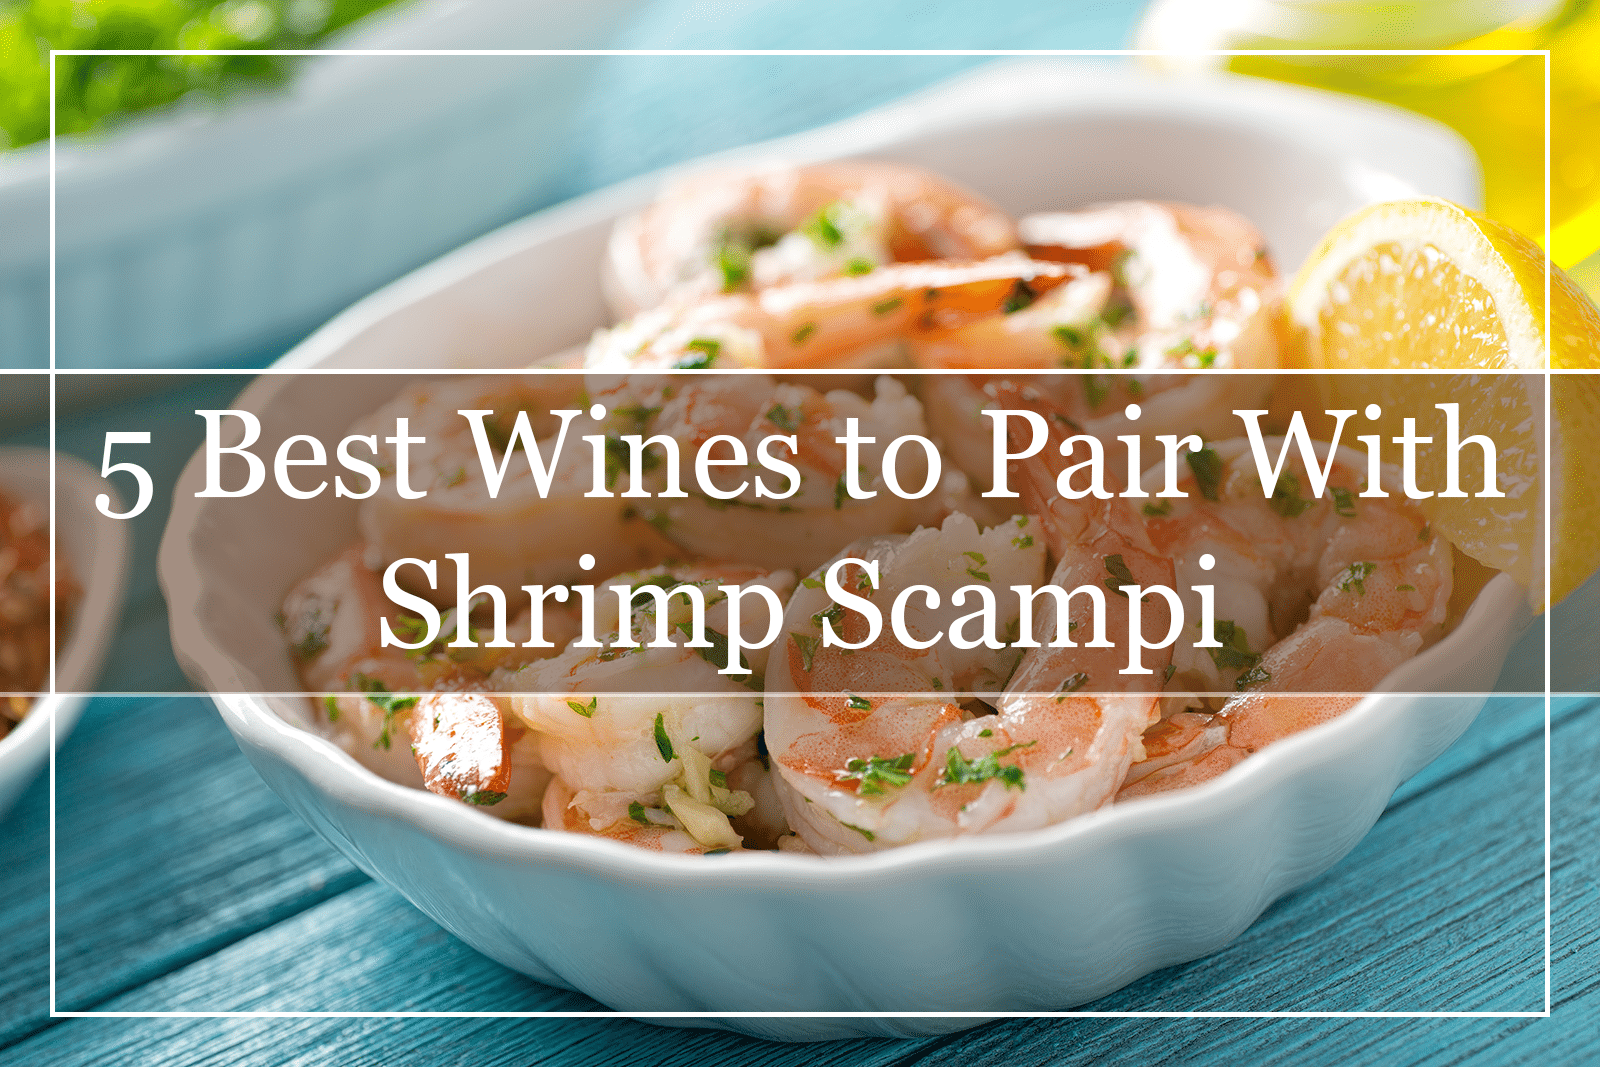 5 Best Wines to Pair With Shrimp Scampi (2022)